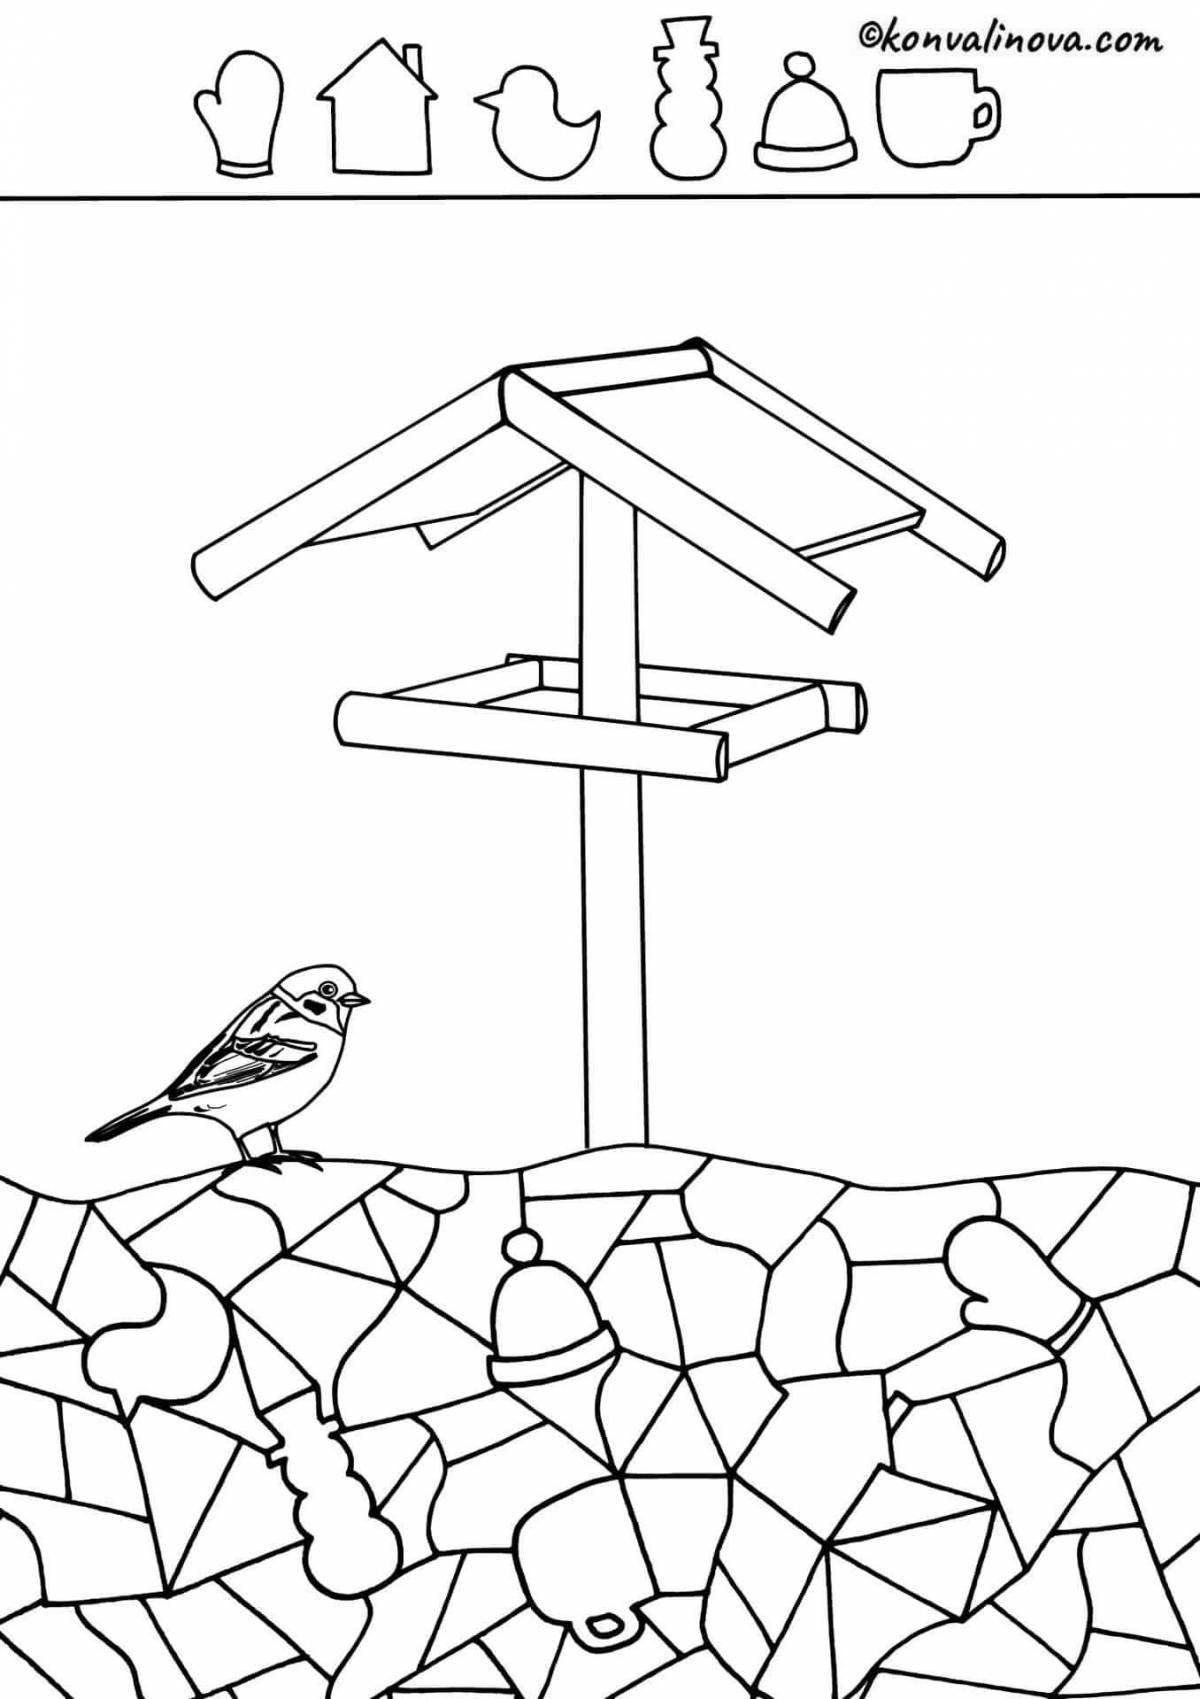 Fun feeder coloring page for kids